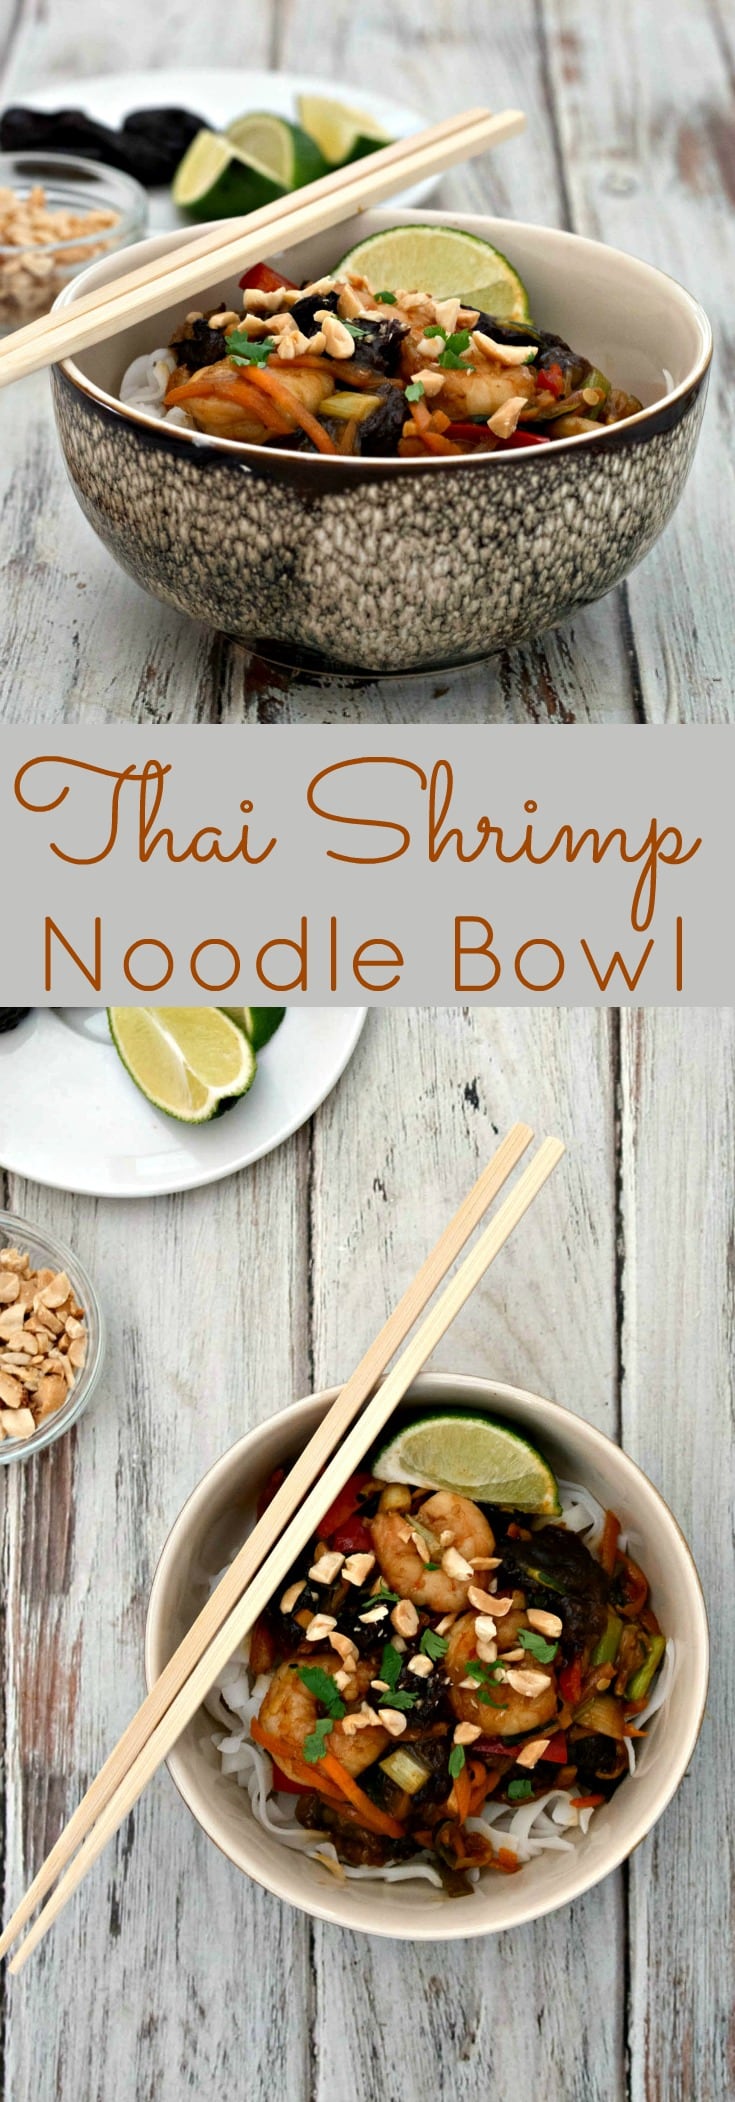 Thai noodle bowl with chopsticks on a wooden table.